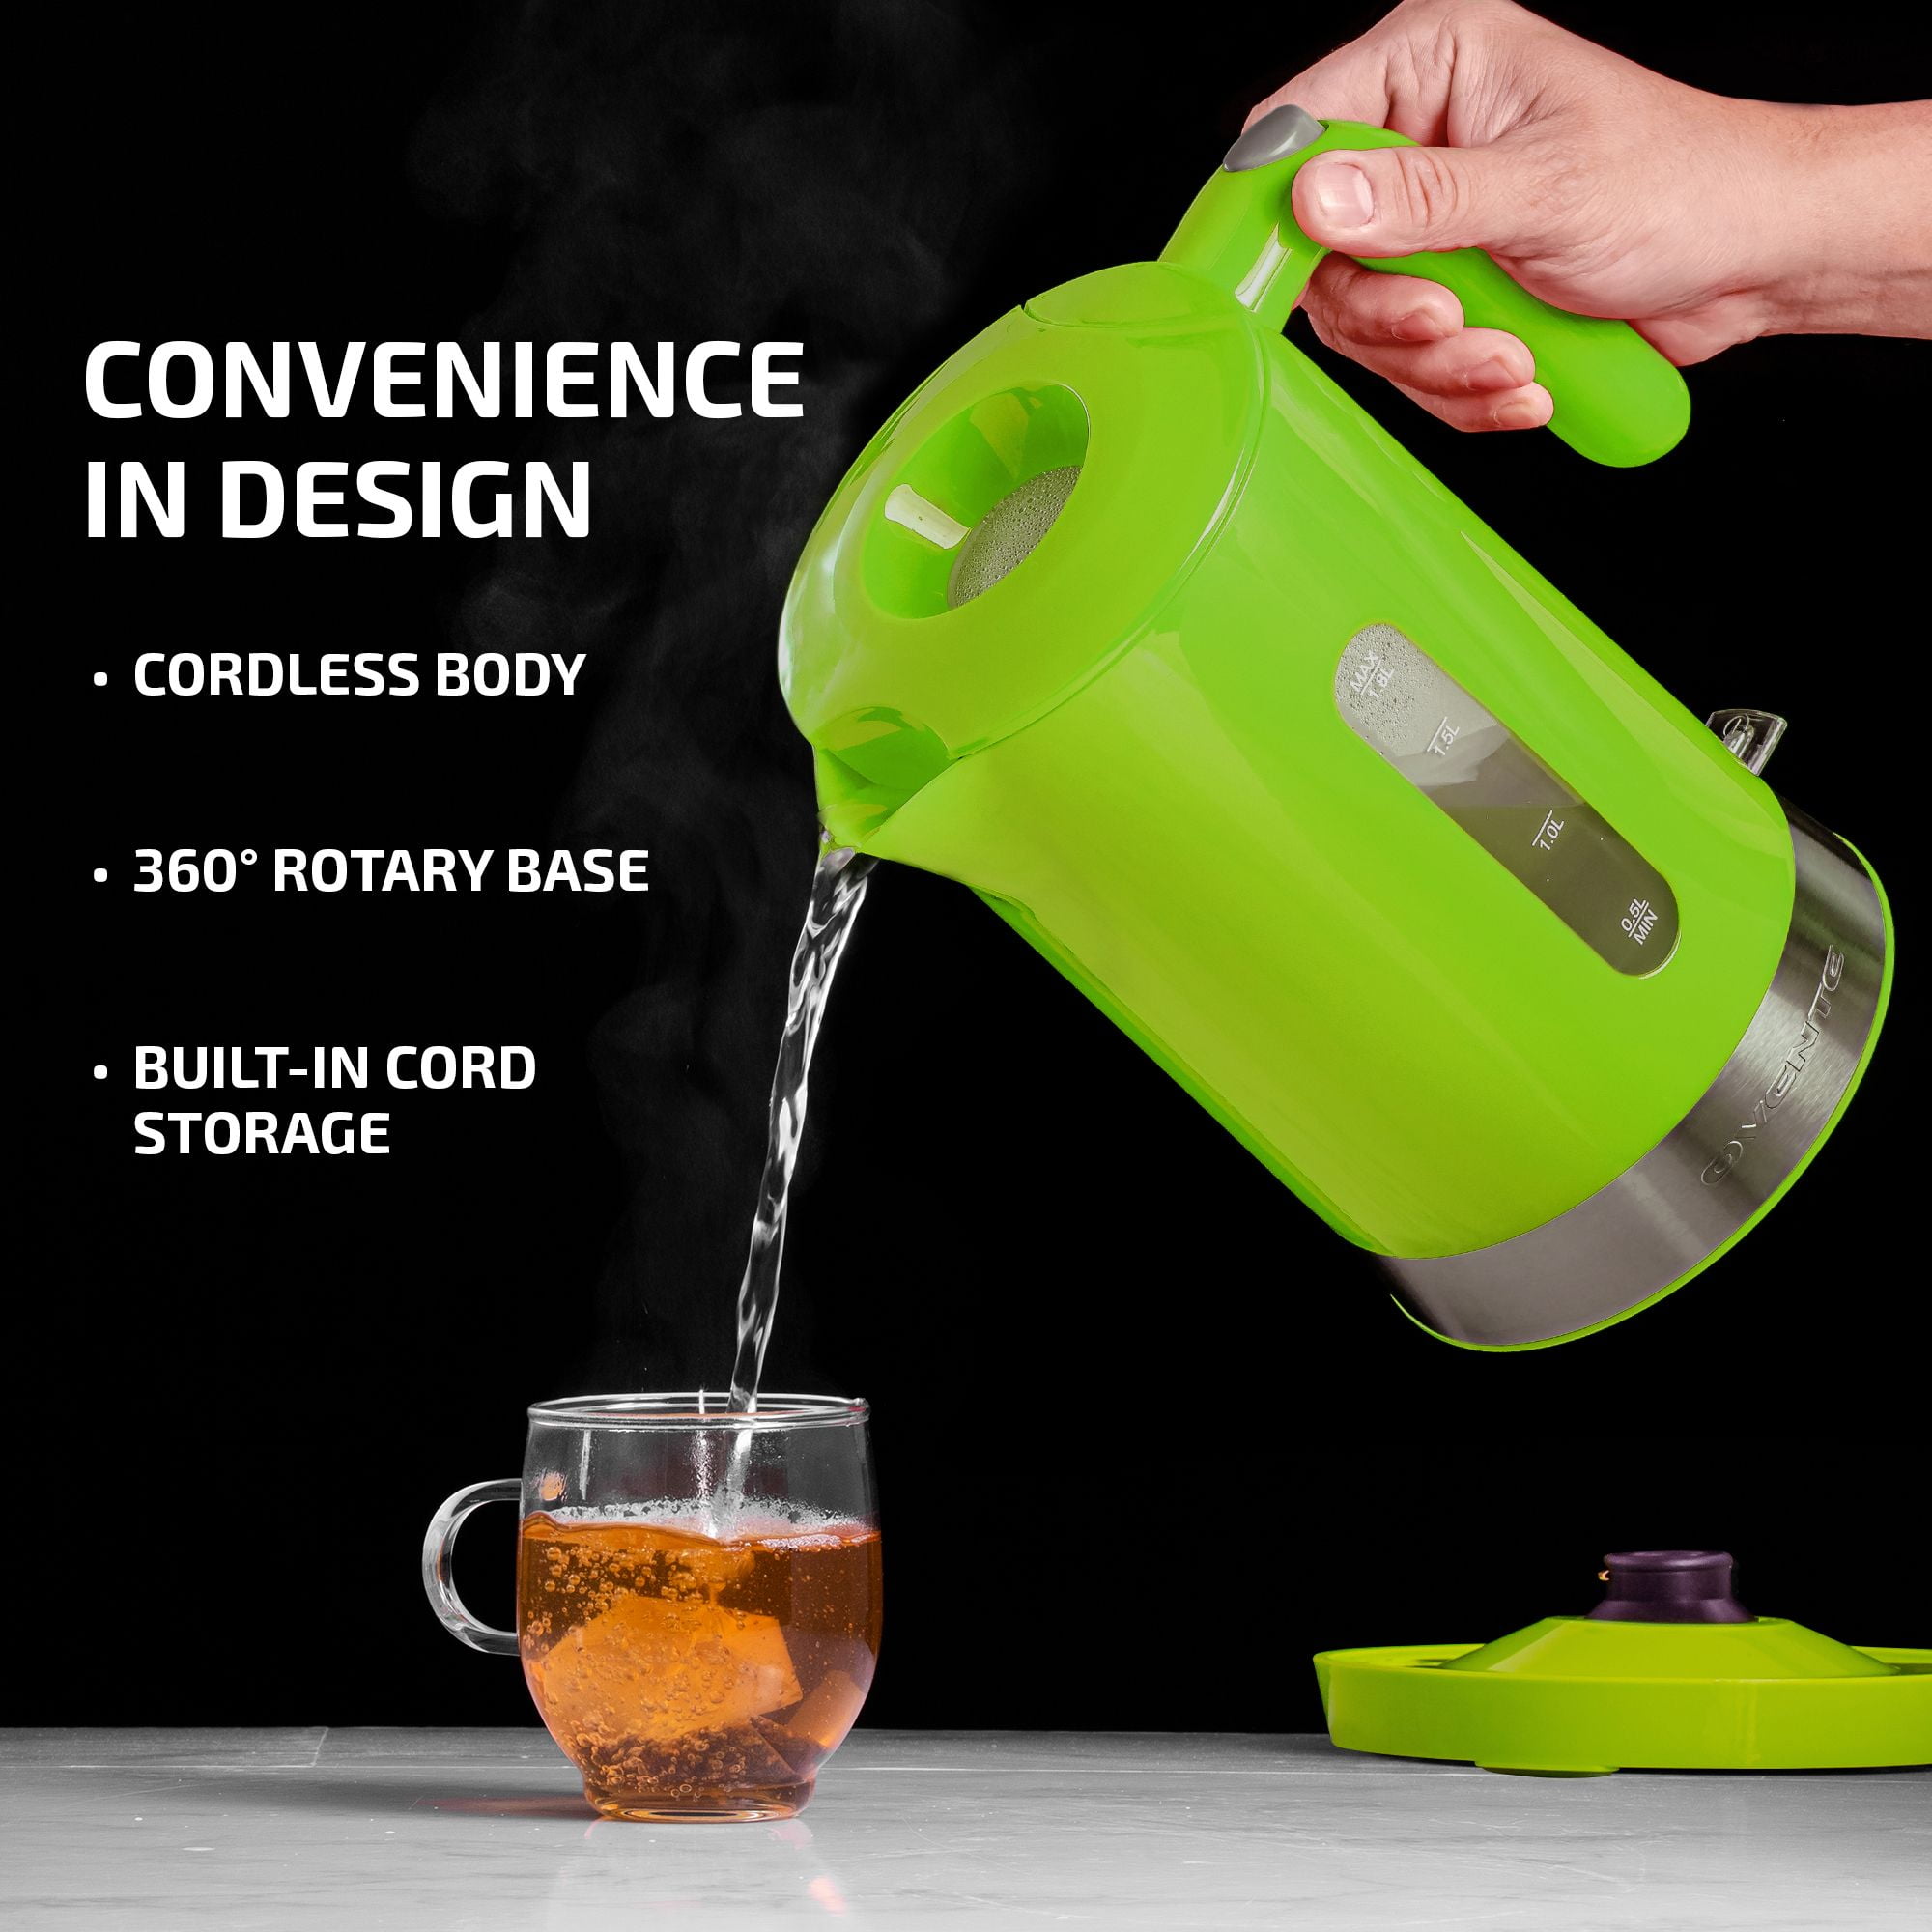 Ovente Electric Hot Water Kettle 1.8 Liter Prontofill Lid 1500W BPA-Free  Portable Countertop Tea Coffee